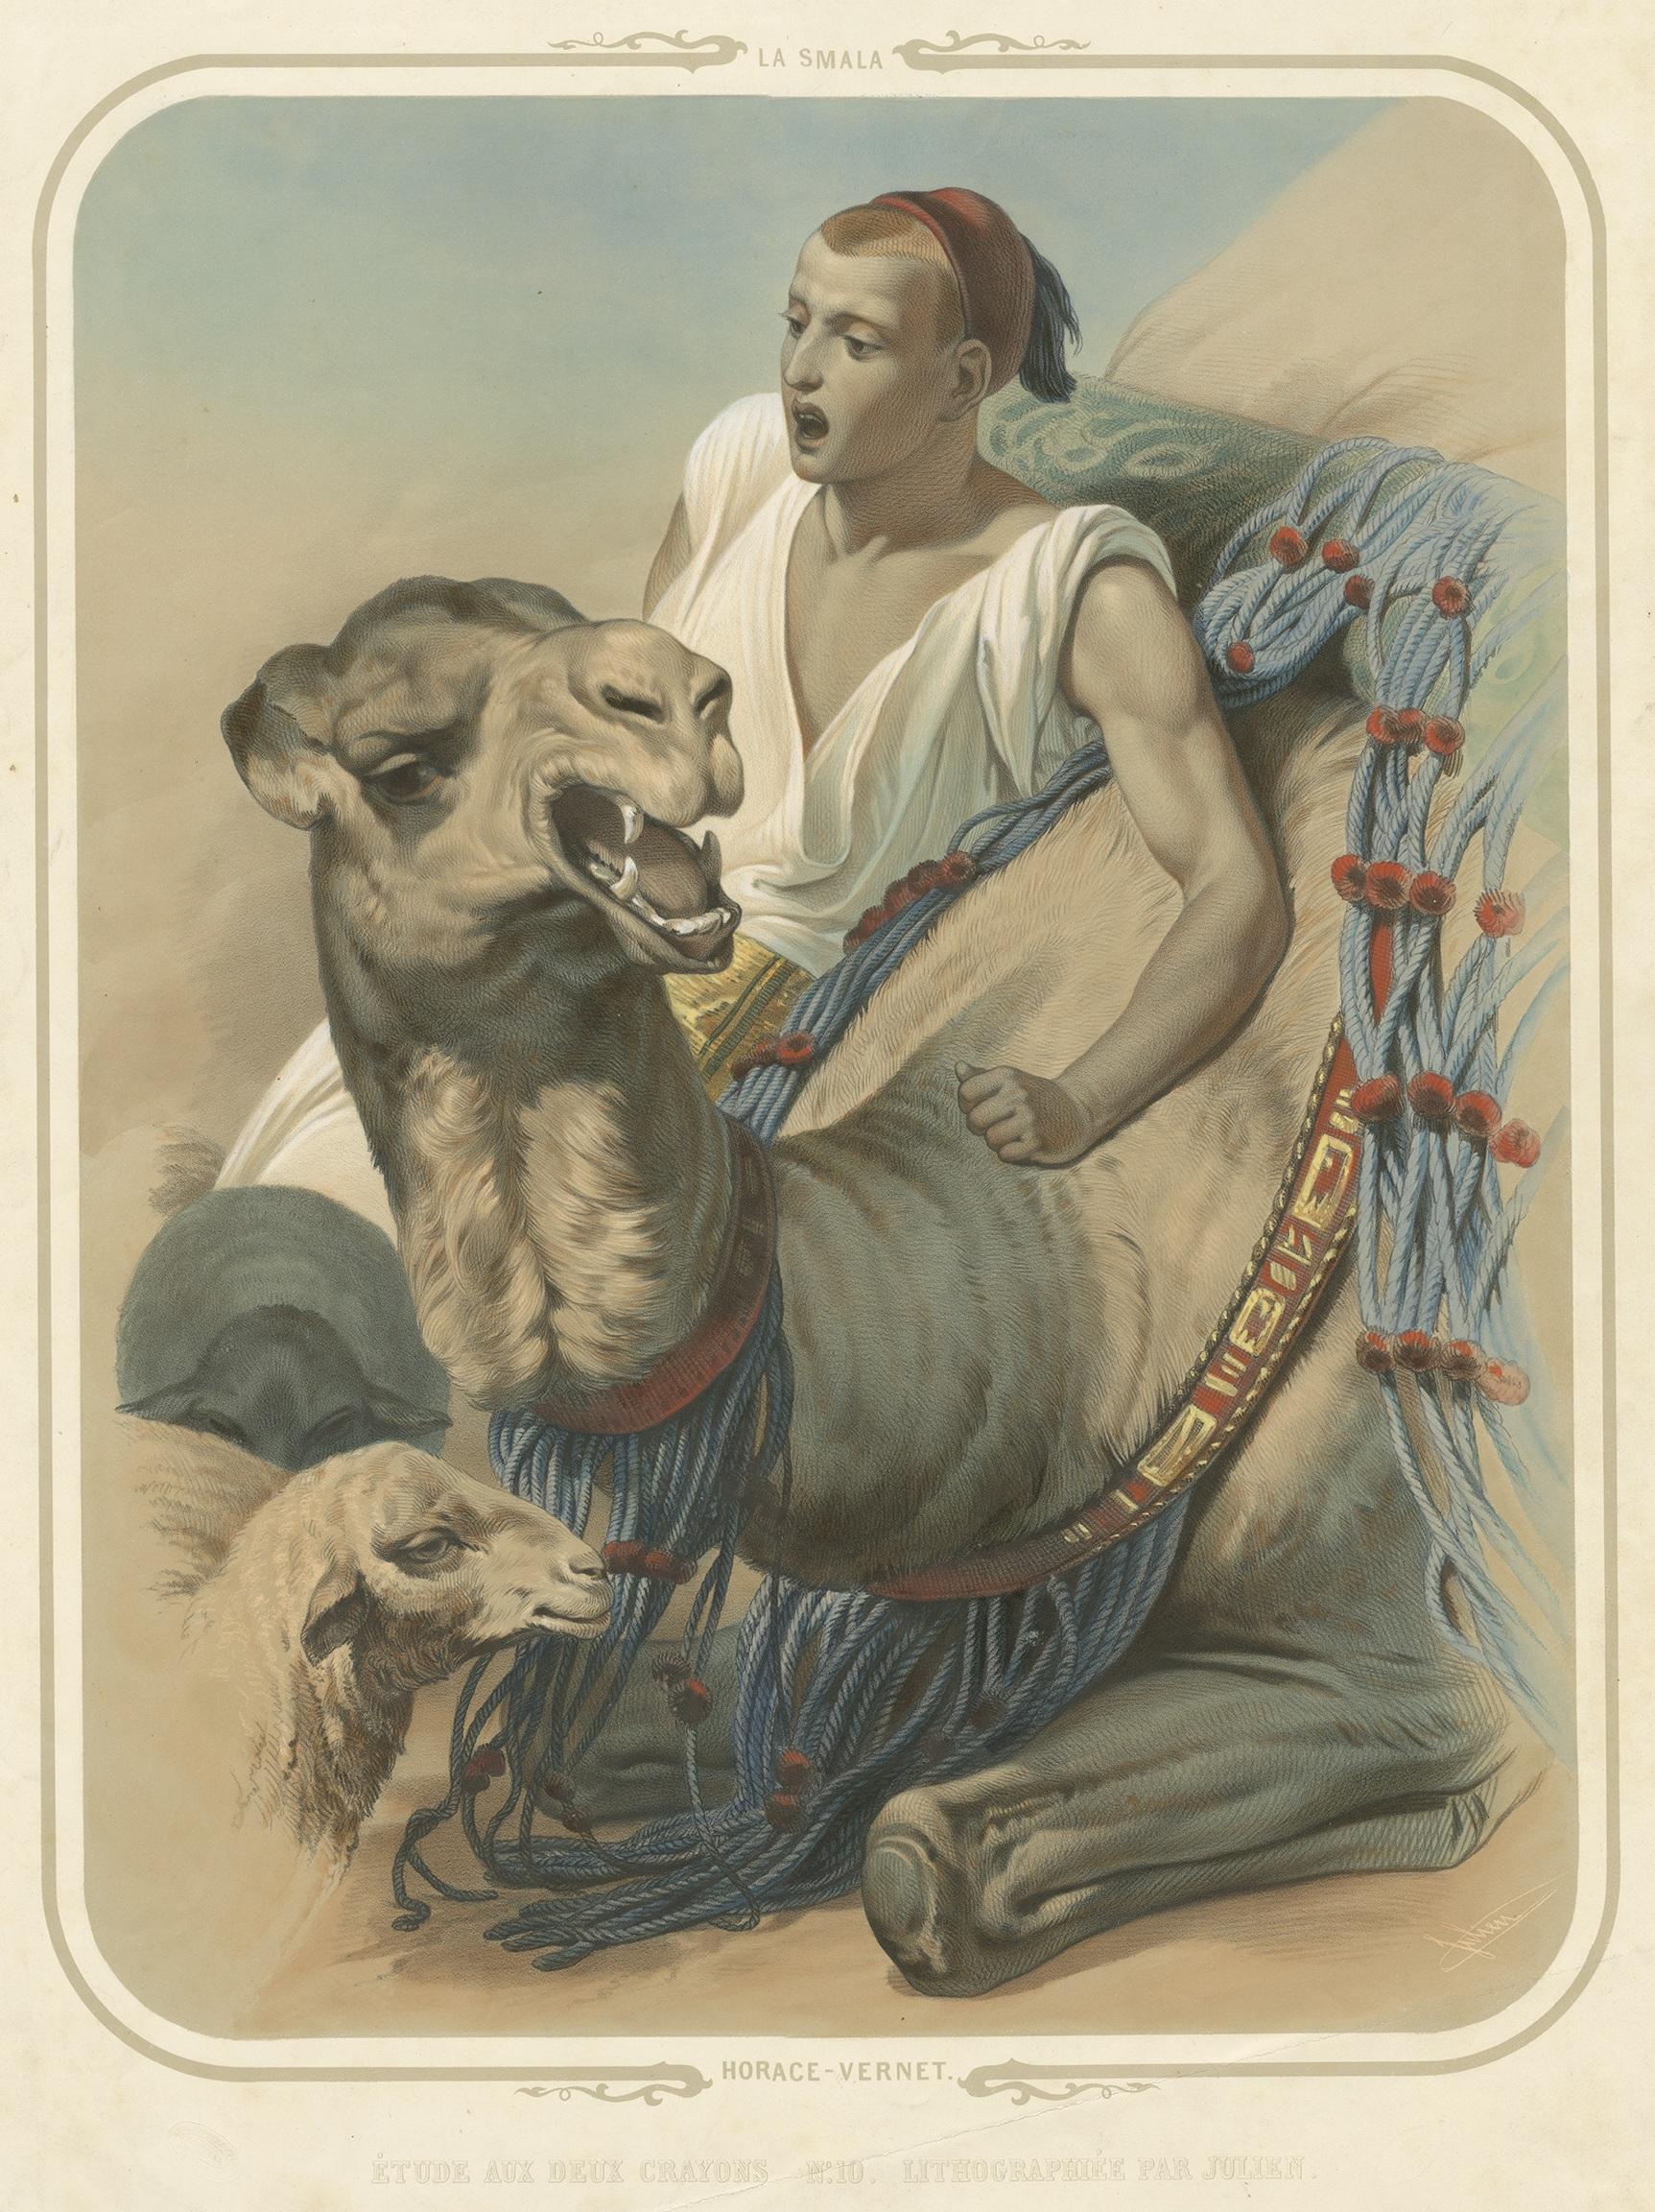 Antique print titled 'La Smala - Étude aux deux Crayons No. 10 Lithographiée par Julien'. Large lithograph of a Bedouin with a Fez and Camel. Originates from a series illustrating the Battle of the Smala, fought in 1843 between France and Algerian